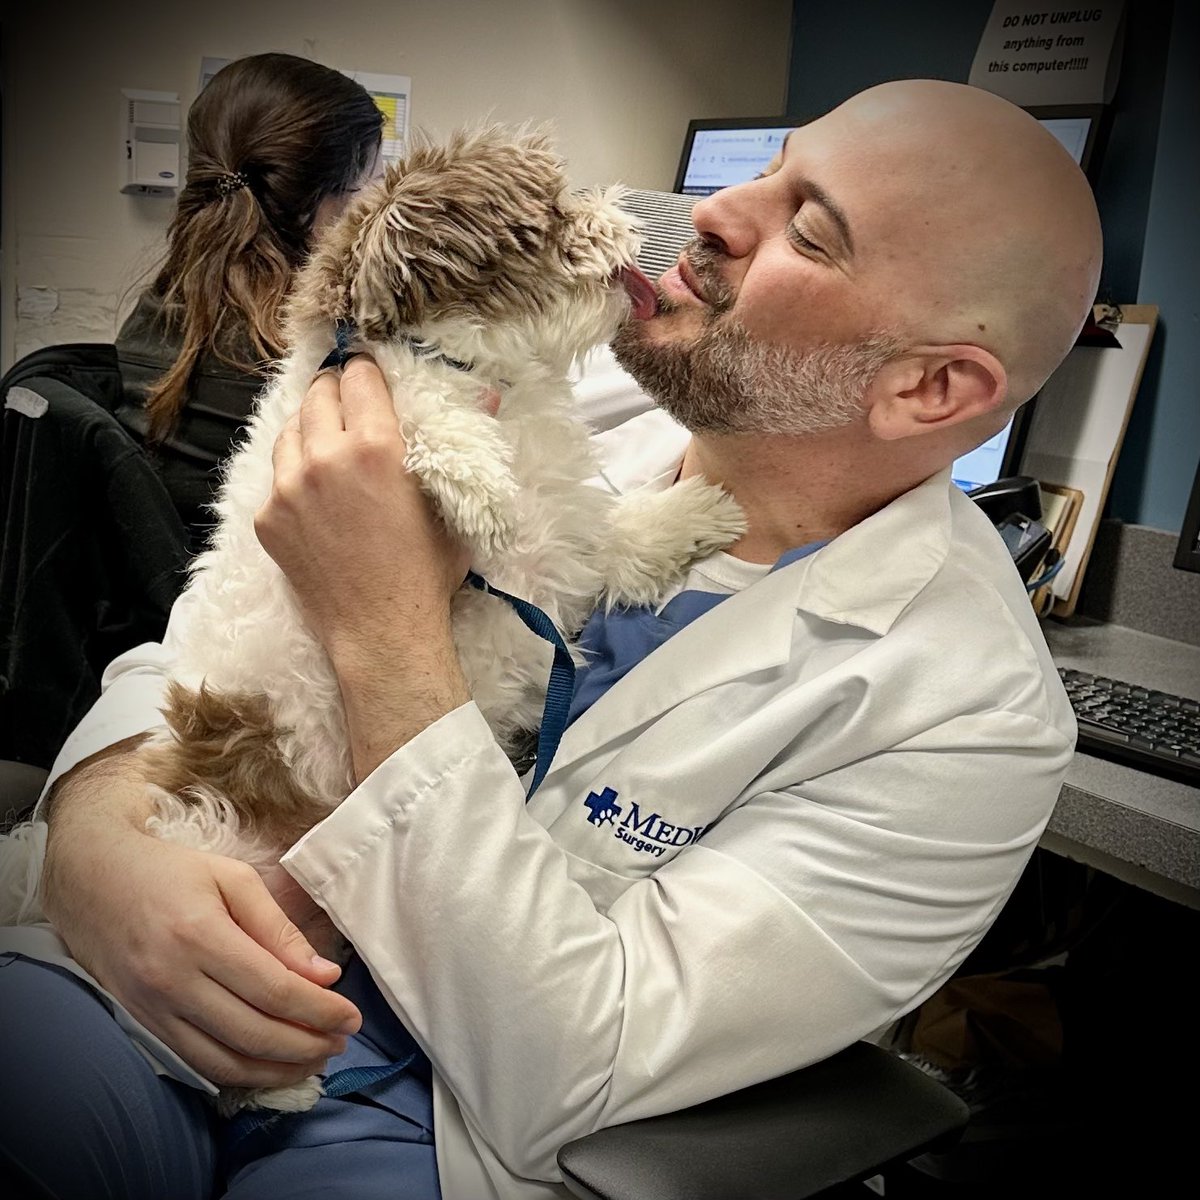 I become mush for a Havanese. This baby is Lucy!!!  We did a baby TPLO on her and she’s all healed up and back to being a kissing machine!  I could do this all day!! ❤️❤️😍😍#medvet #veterinarysurgery #veterinarysurgeon #medvetcincinnati #acvs #cincinnati #cincypet #dogsofcincy